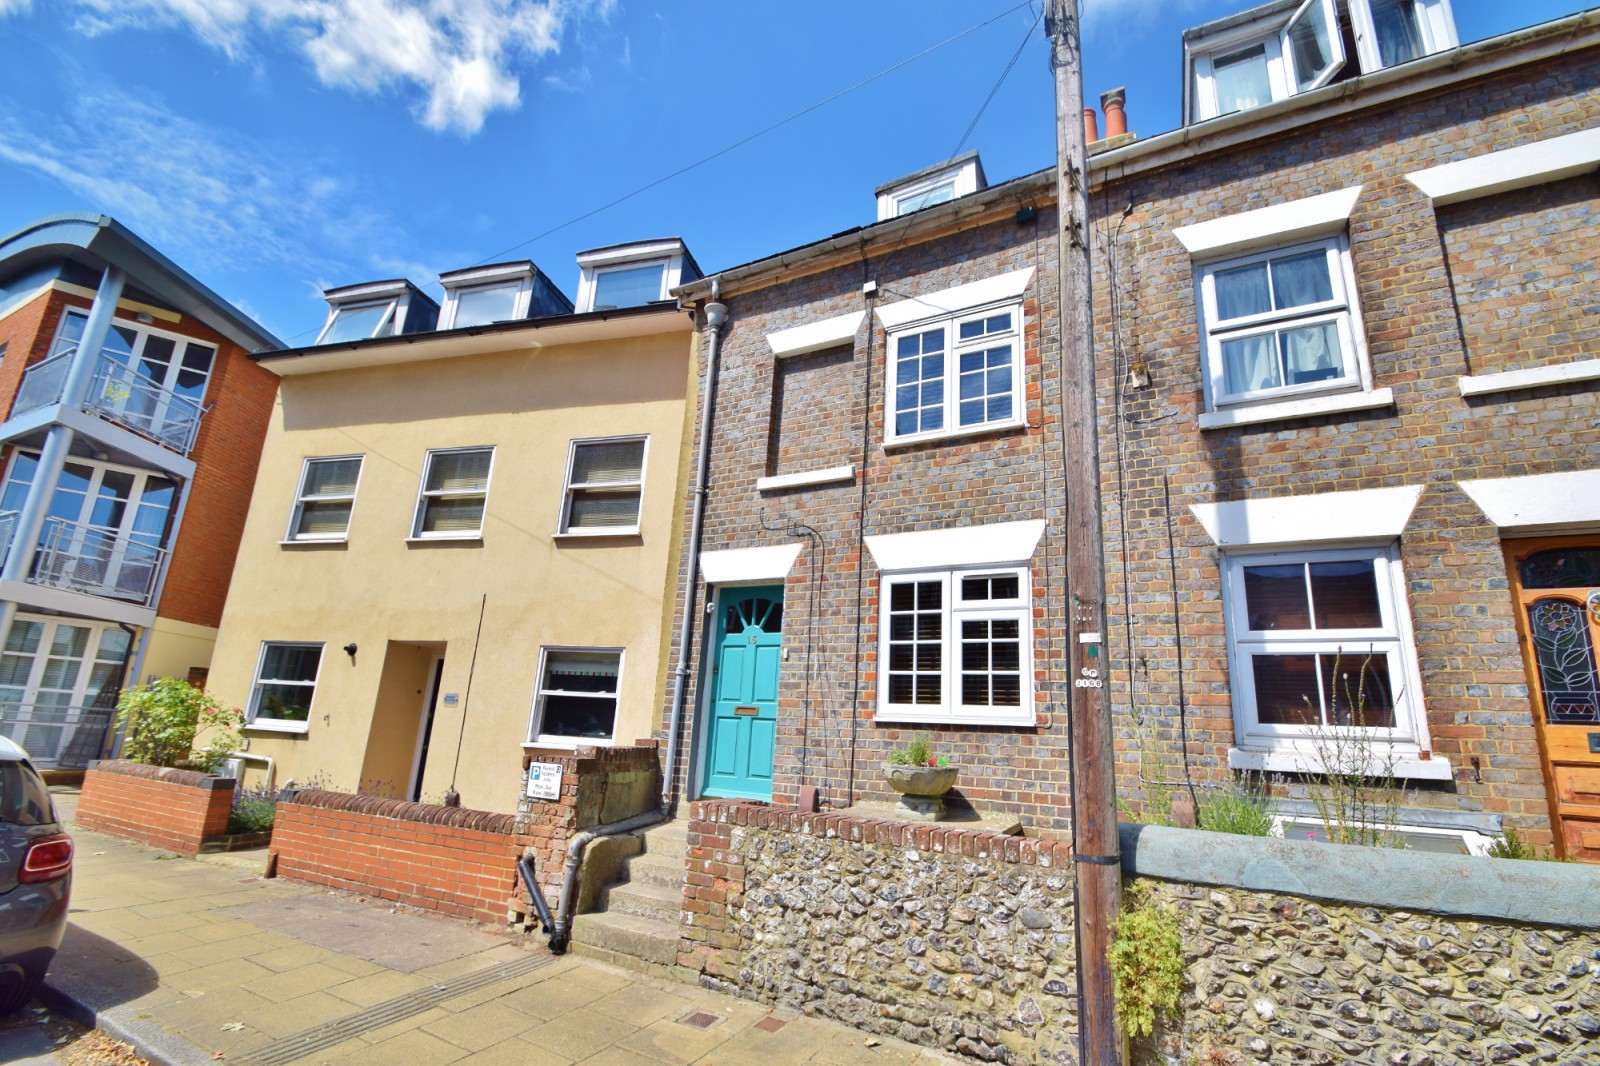 15 Sussex Street, Winchester, SO23 8TG